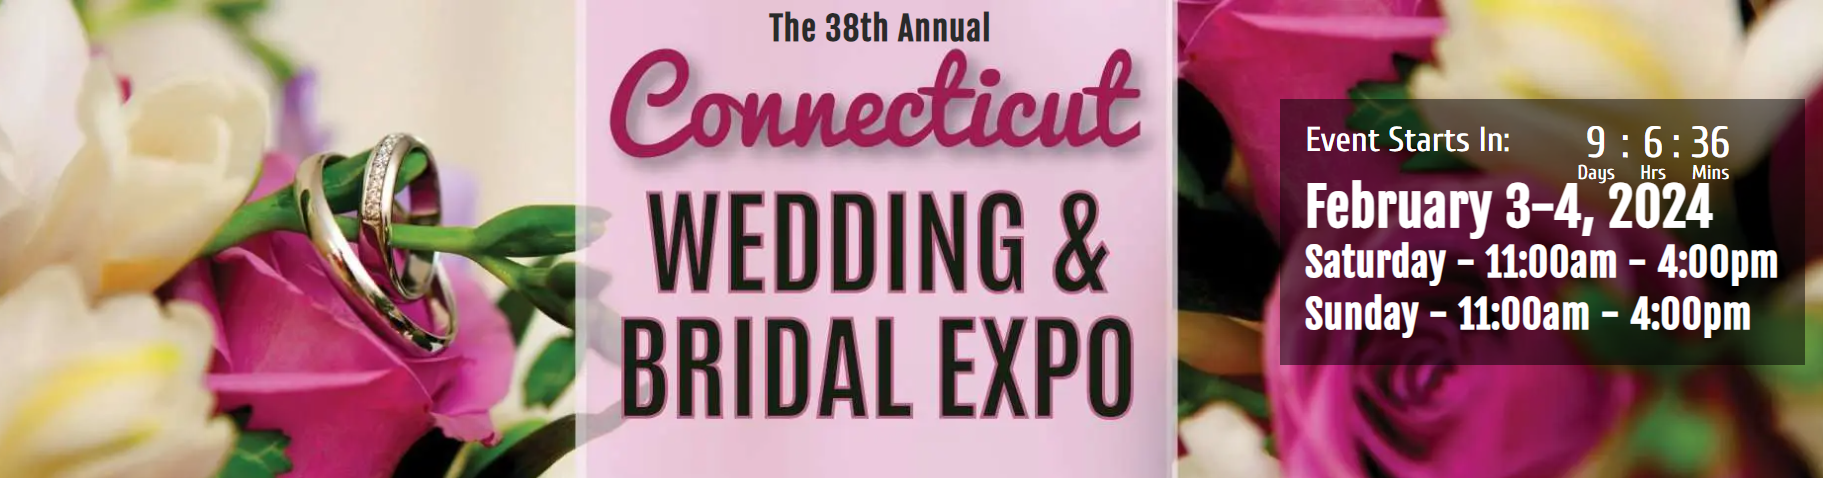 Annual Connecticut Bridal Expo at the Connecticut Convention Center